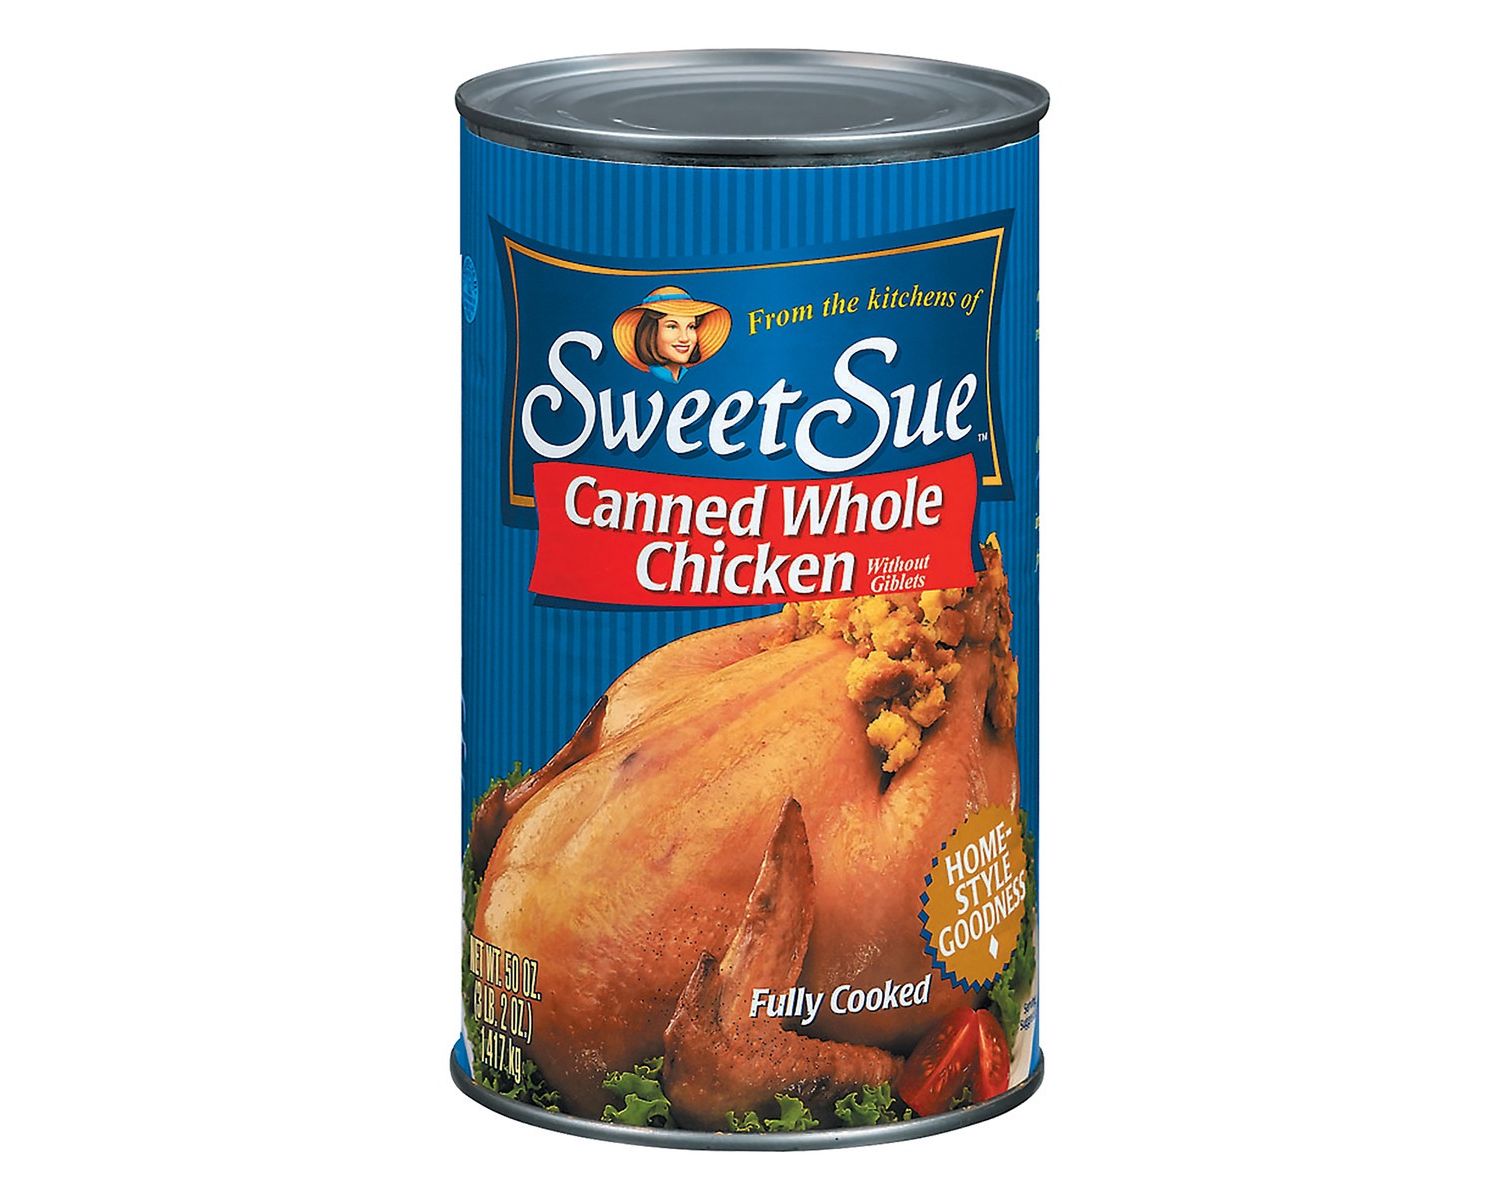 19-canned-chicken-nutrition-facts